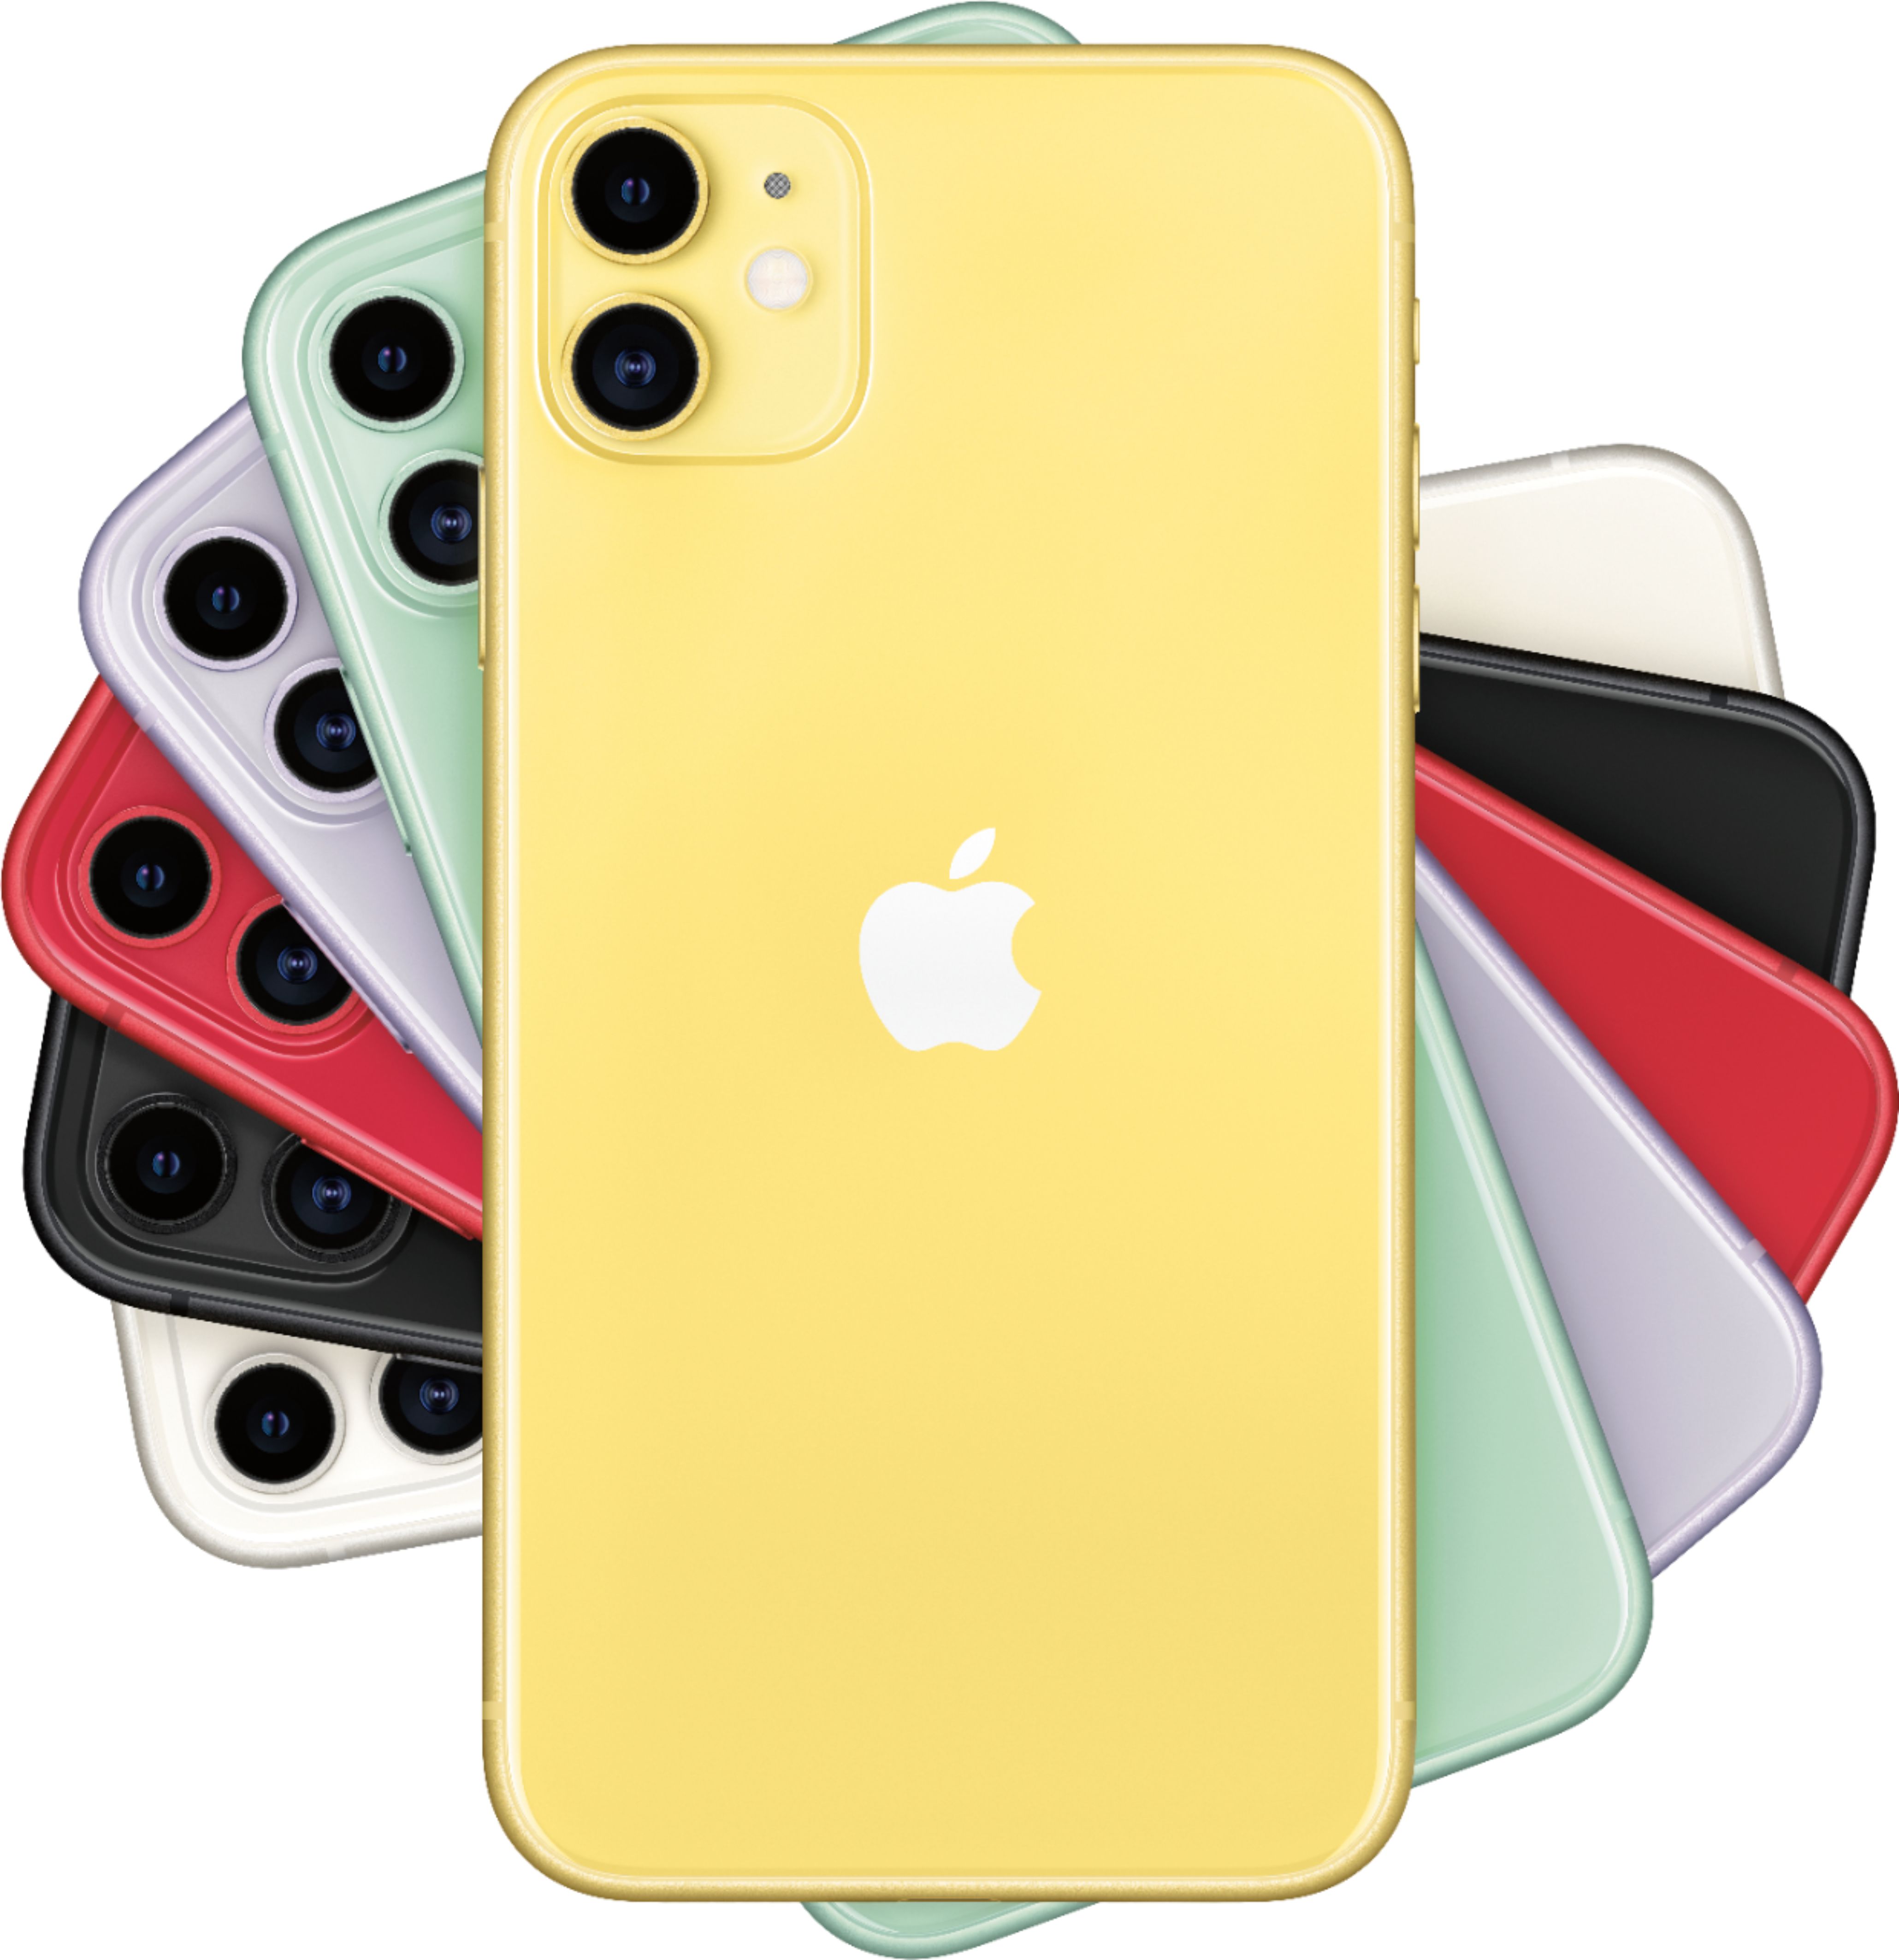 Apple iPhone 11 64GB Yellow (AT&T) MWLA2LL/A - Best Buy